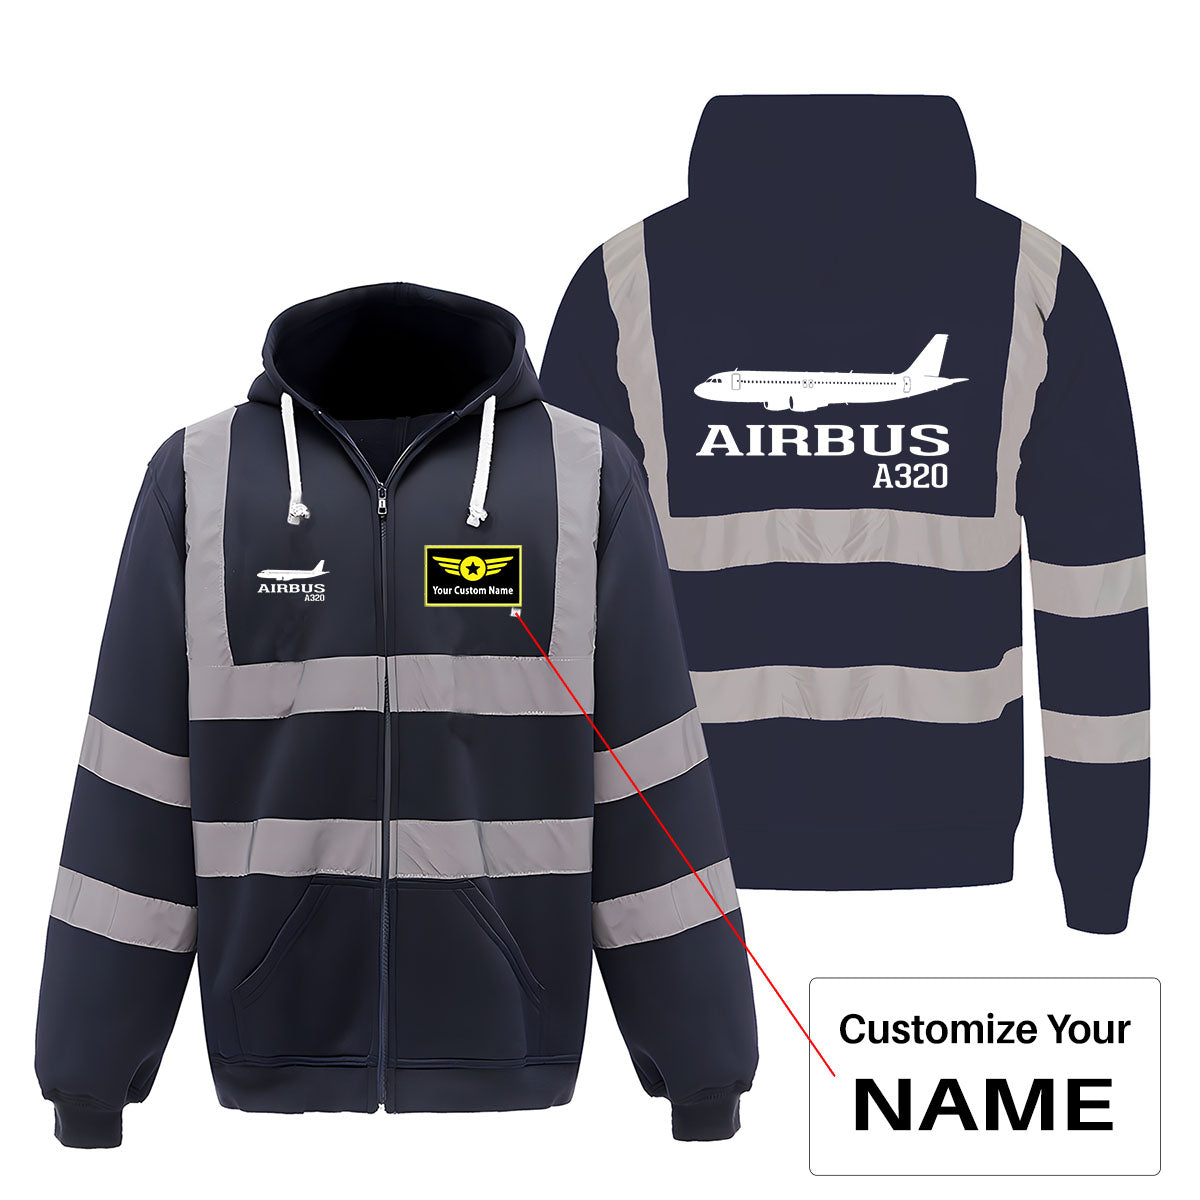 Airbus A320 Printed Designed Reflective Zipped Hoodies